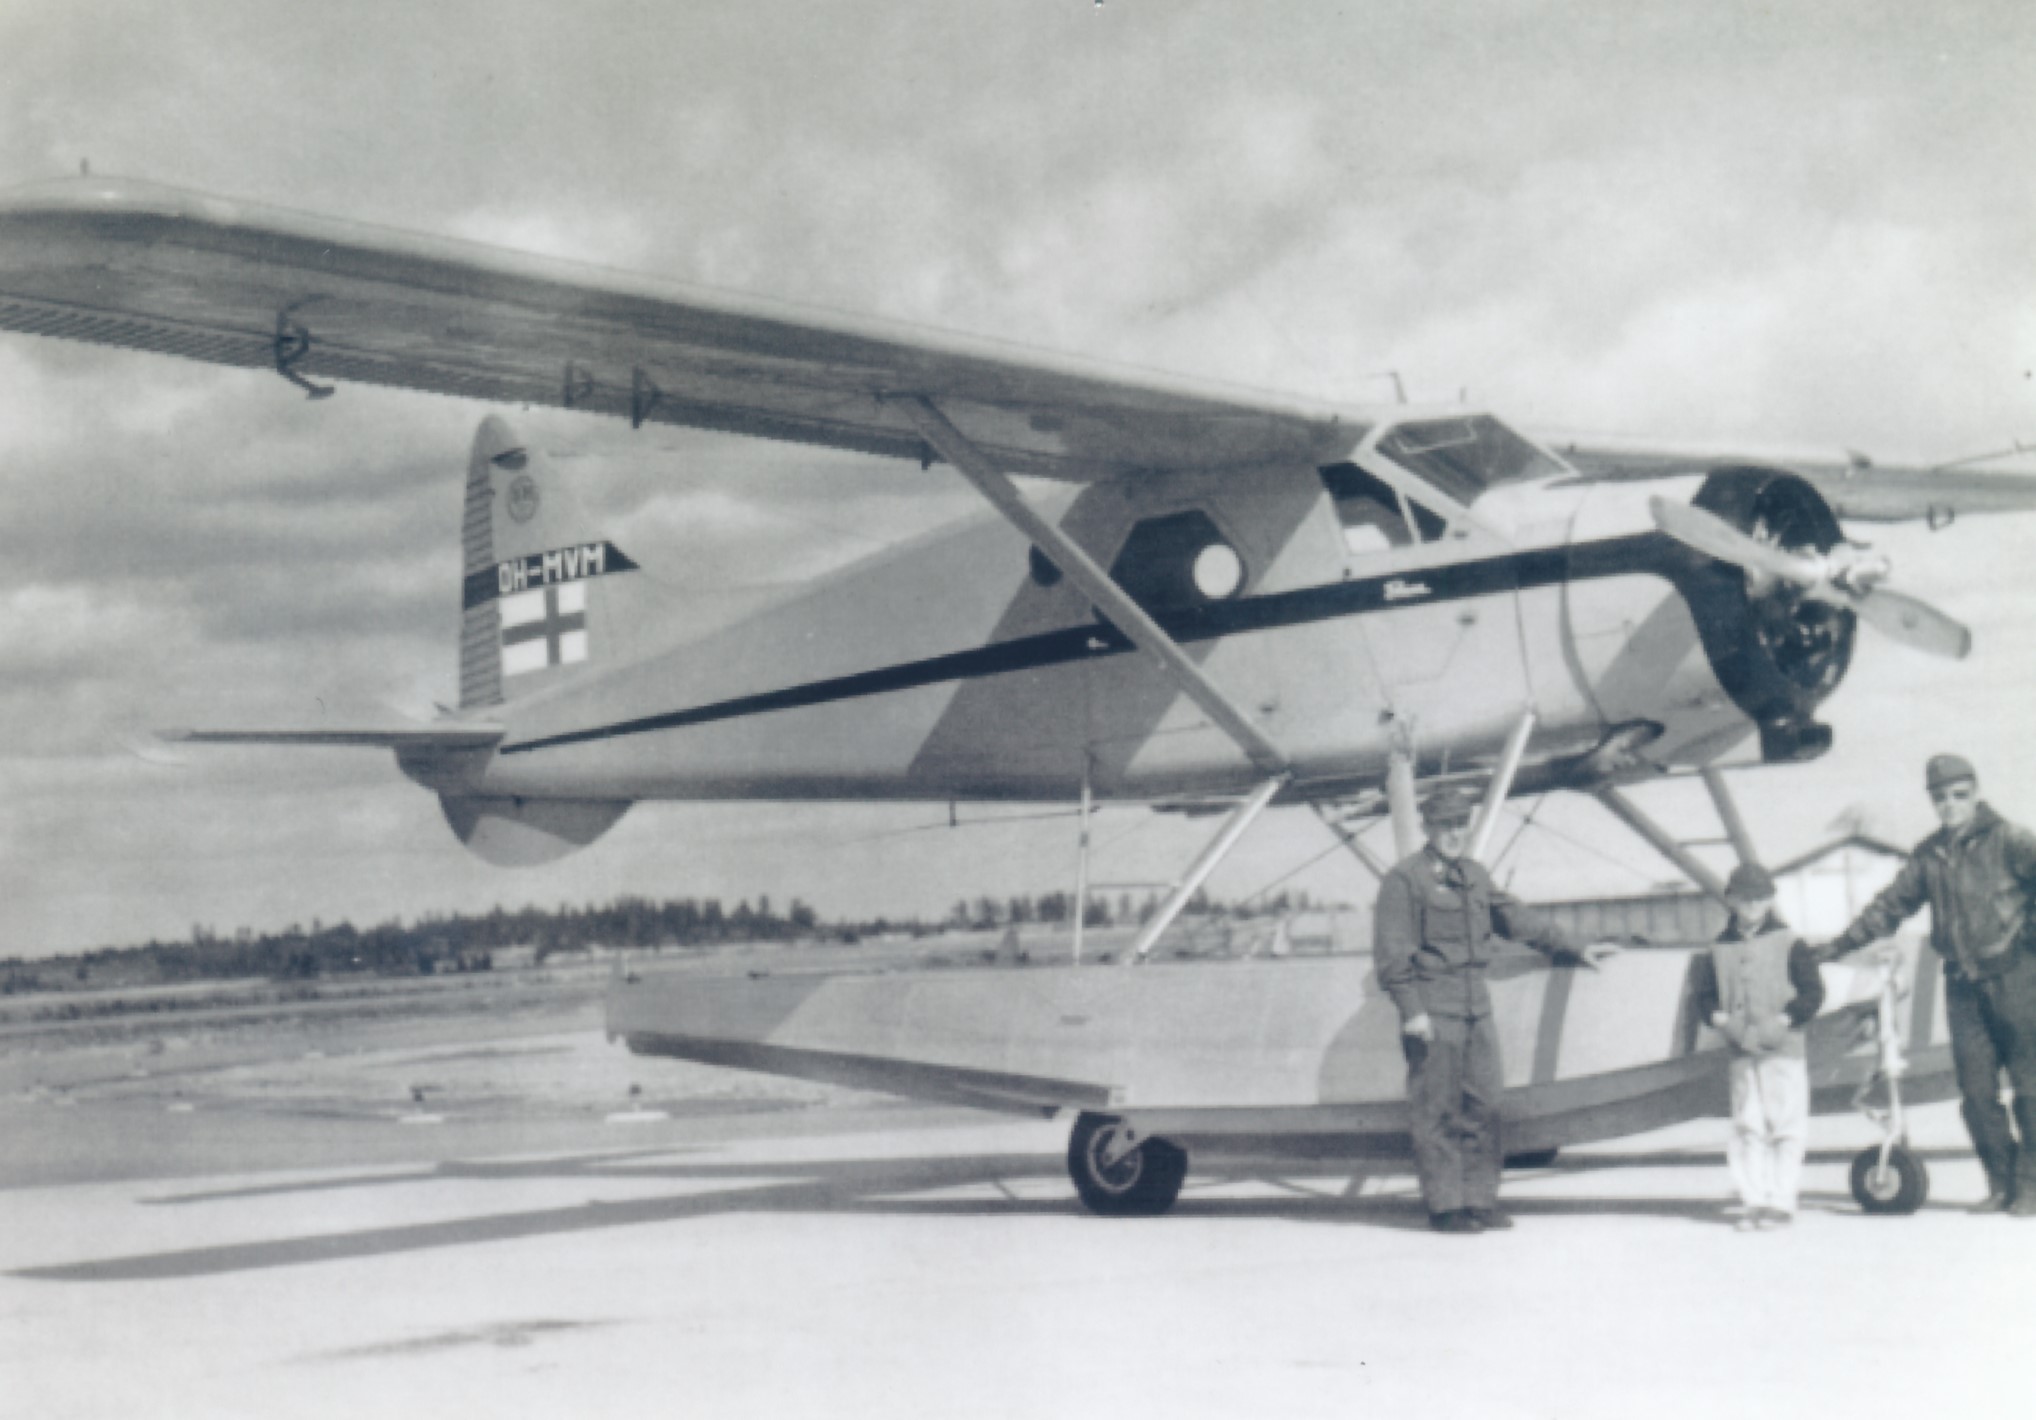 A single-engine aeroplane with floats stands on the asphalt of an airstrip. Two crew members are standing in front of the plane and a small boy is standing between them.